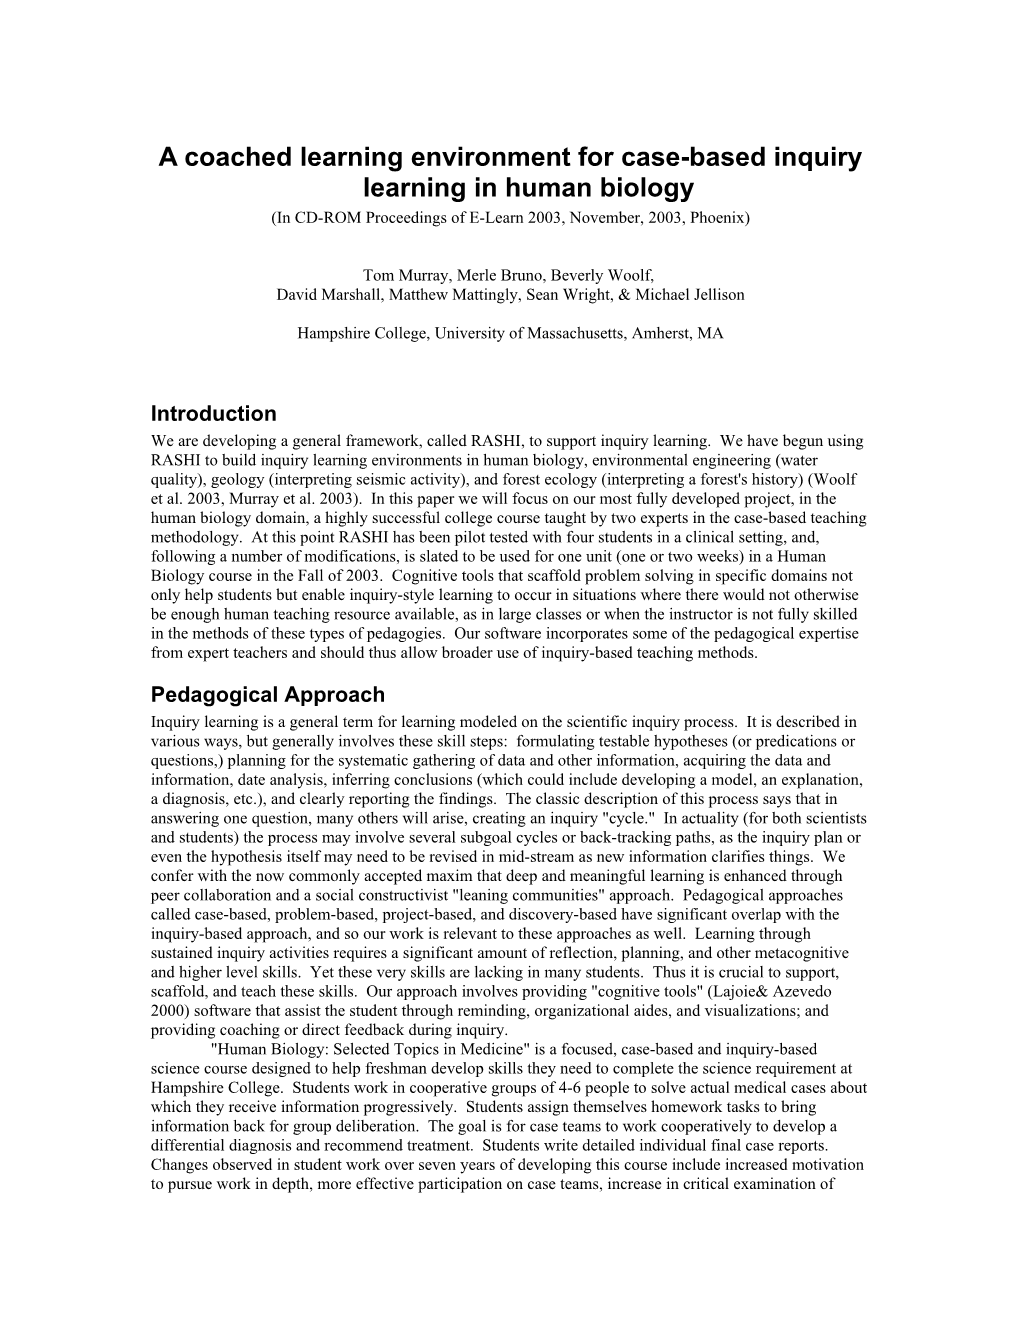 A Coached Learning Environment for Case-Based Inquiry Learning in Human Biology